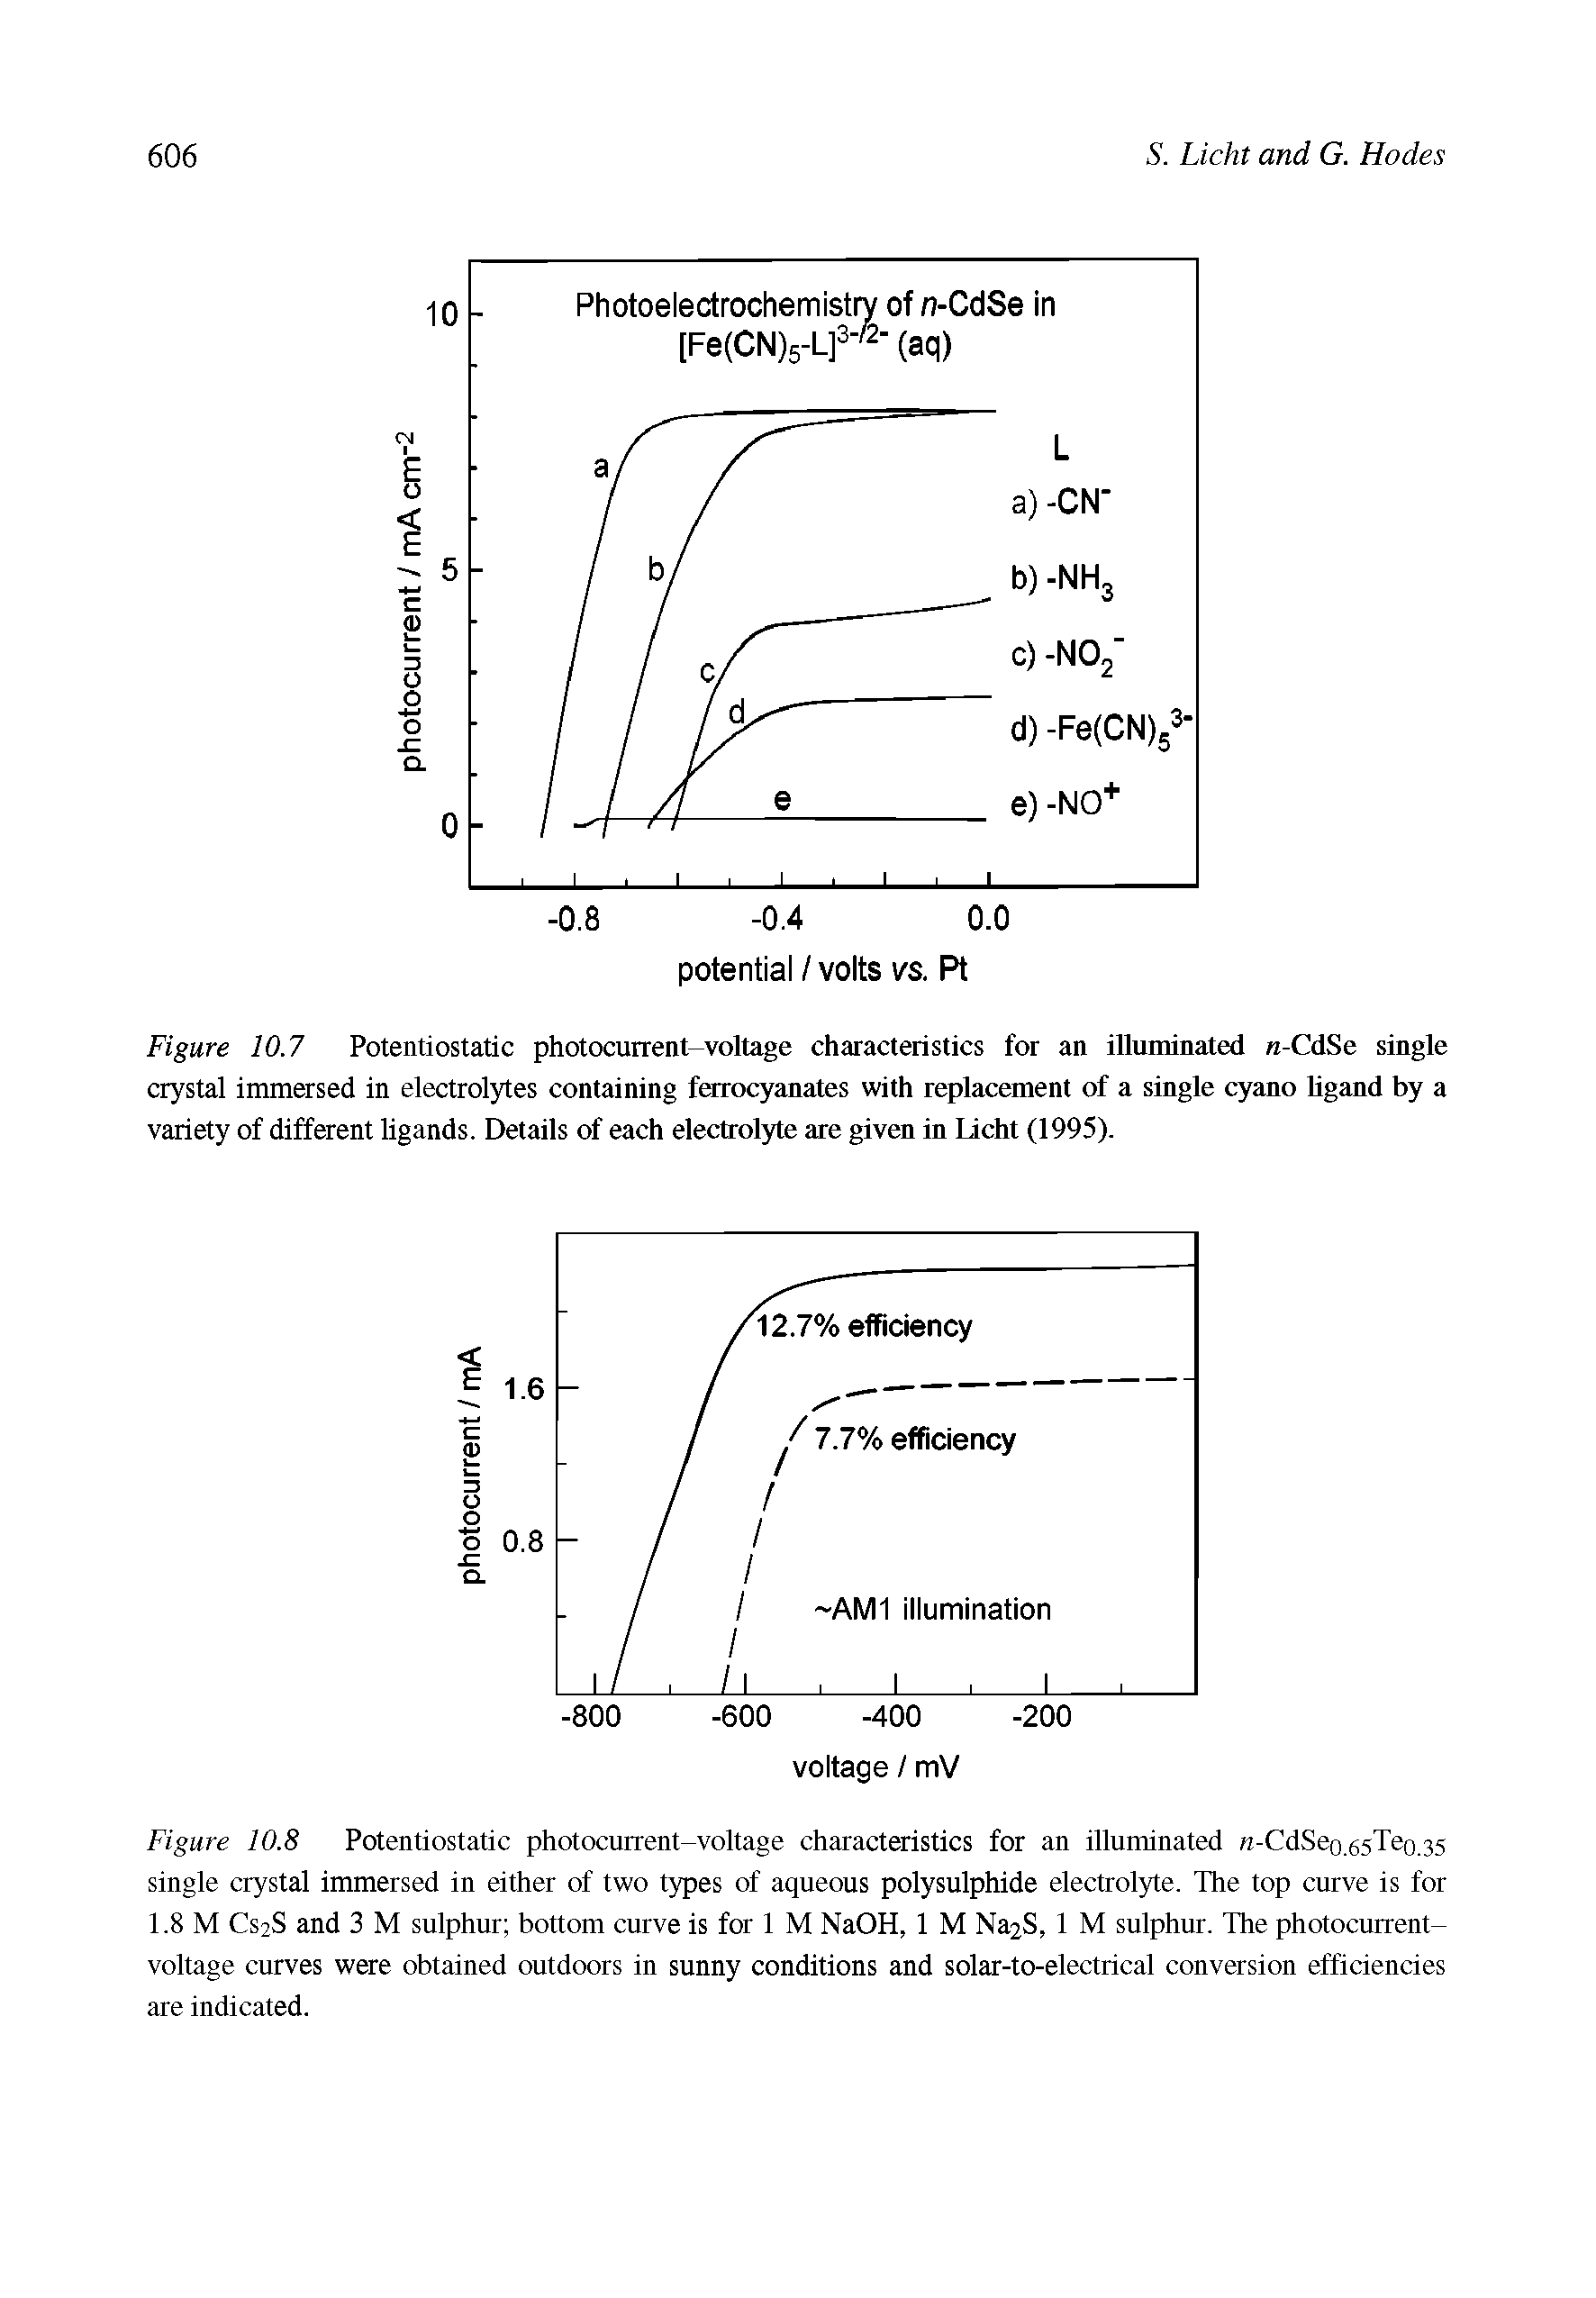 Figure 10.8 Potentiostatic photocurrent-voltage characteristics for an illuminated n-CdSeo.65Teo.35 single crystal immersed in either of two types of aqueous polysulphide electrolyte. The top curve is for 1.8 M CS2S and 3 M sulphur bottom curve is for 1 M NaOH, 1 M Na2S, 1 M sulphur. The photocurrent-voltage curves were obtained outdoors in sunny conditions and solar-to-electrical conversion efficiencies are indicated.